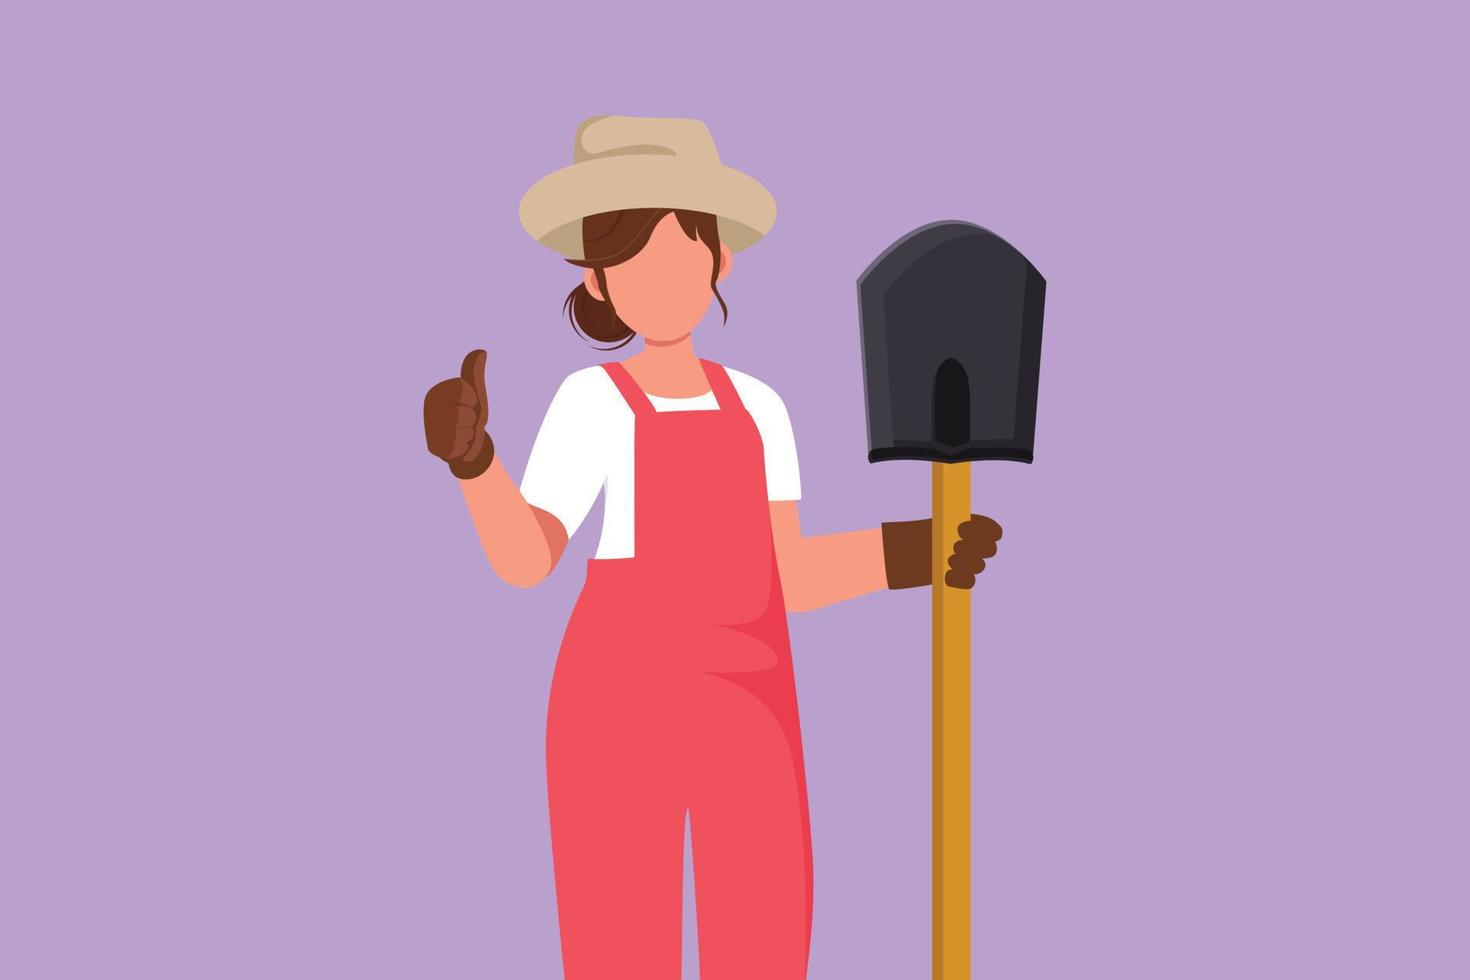 Graphic flat design drawing of female farmer holding shovel with thumbs up gesture and wearing straw hat working on farm at harvest time. Countryside or rural living. Cartoon style vector illustration